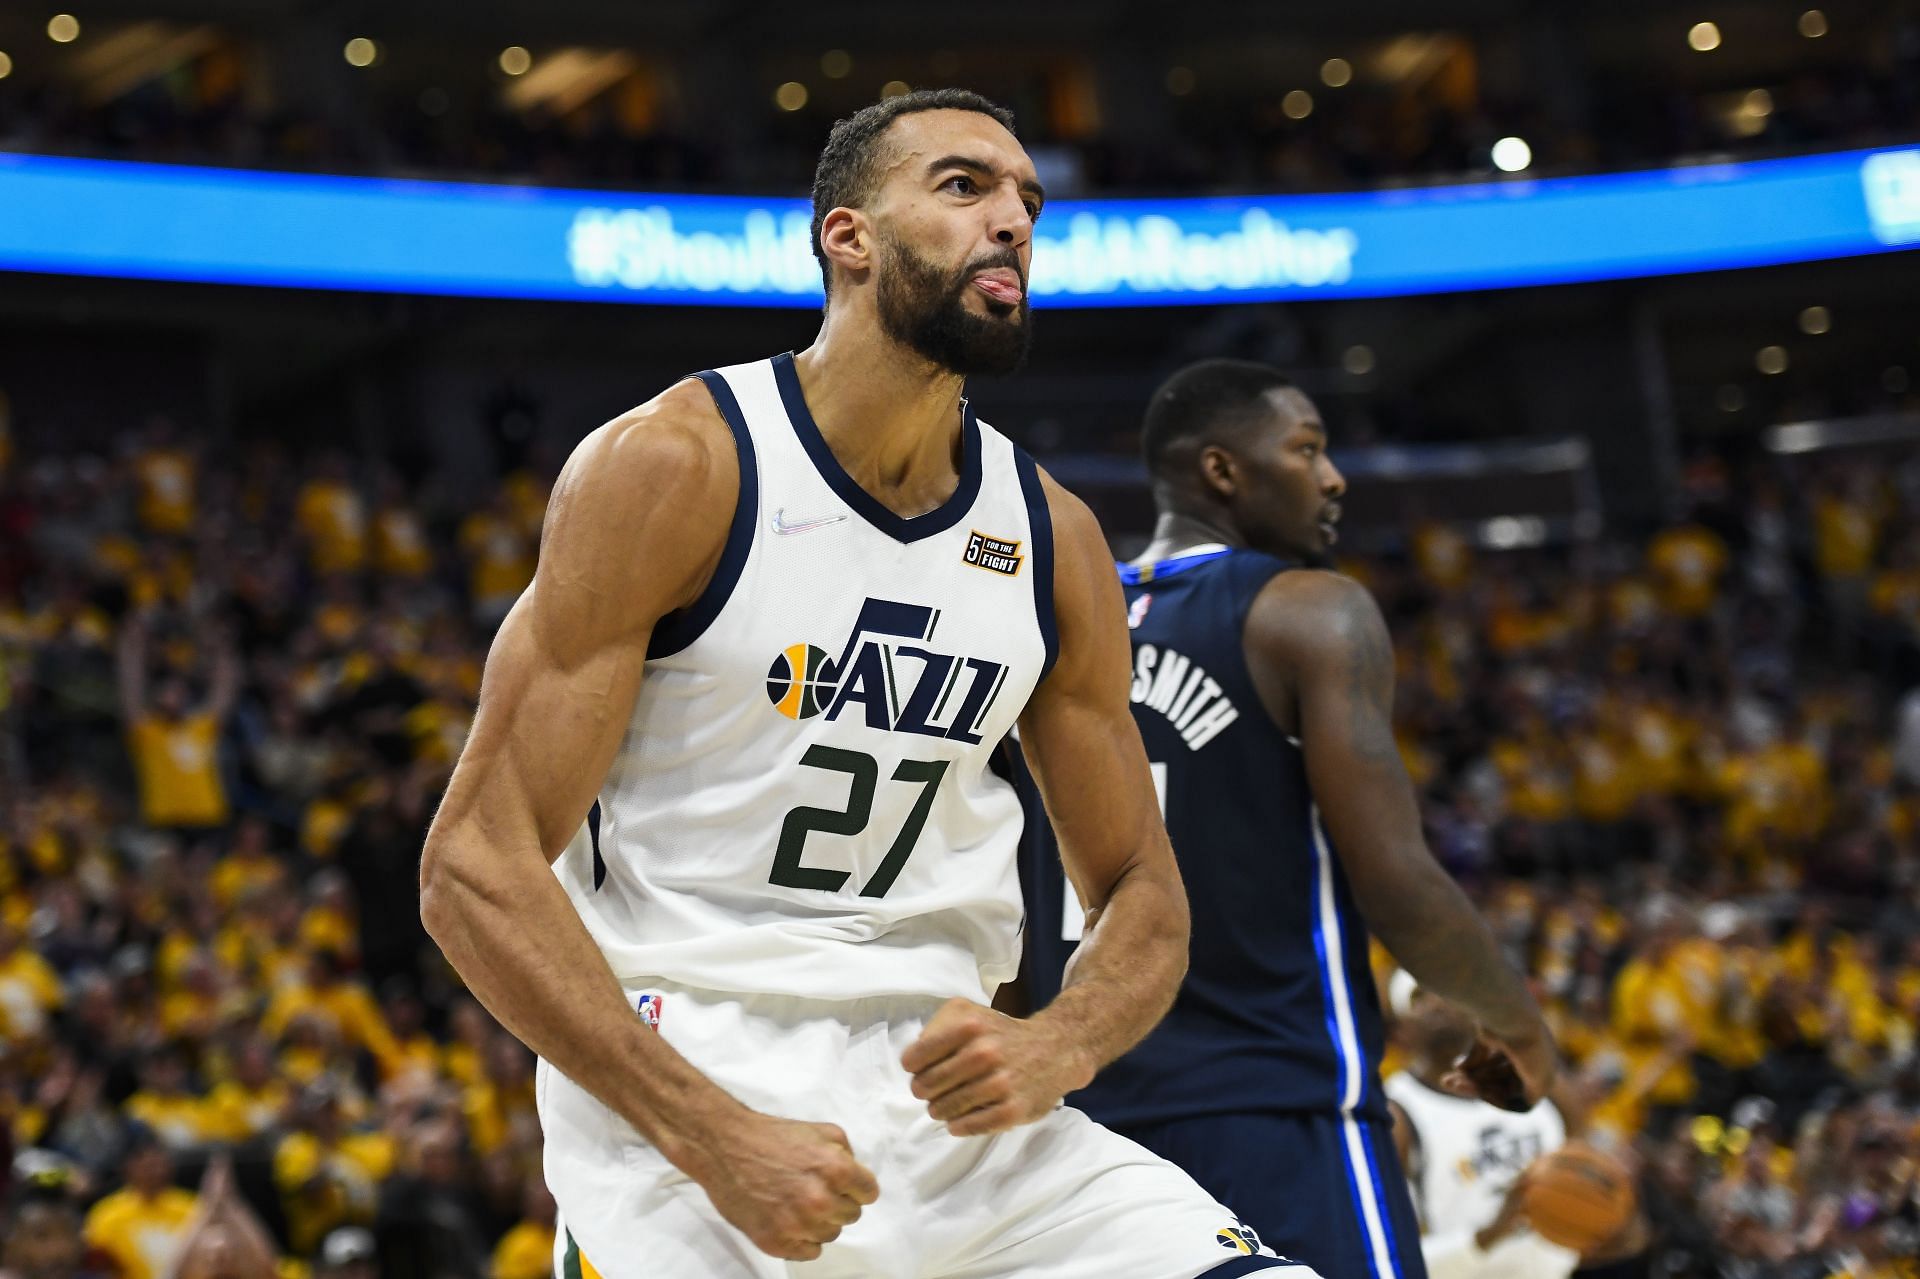 Rudy Gobert may not be a great producer offensively, but he is a phenomenal rim protector